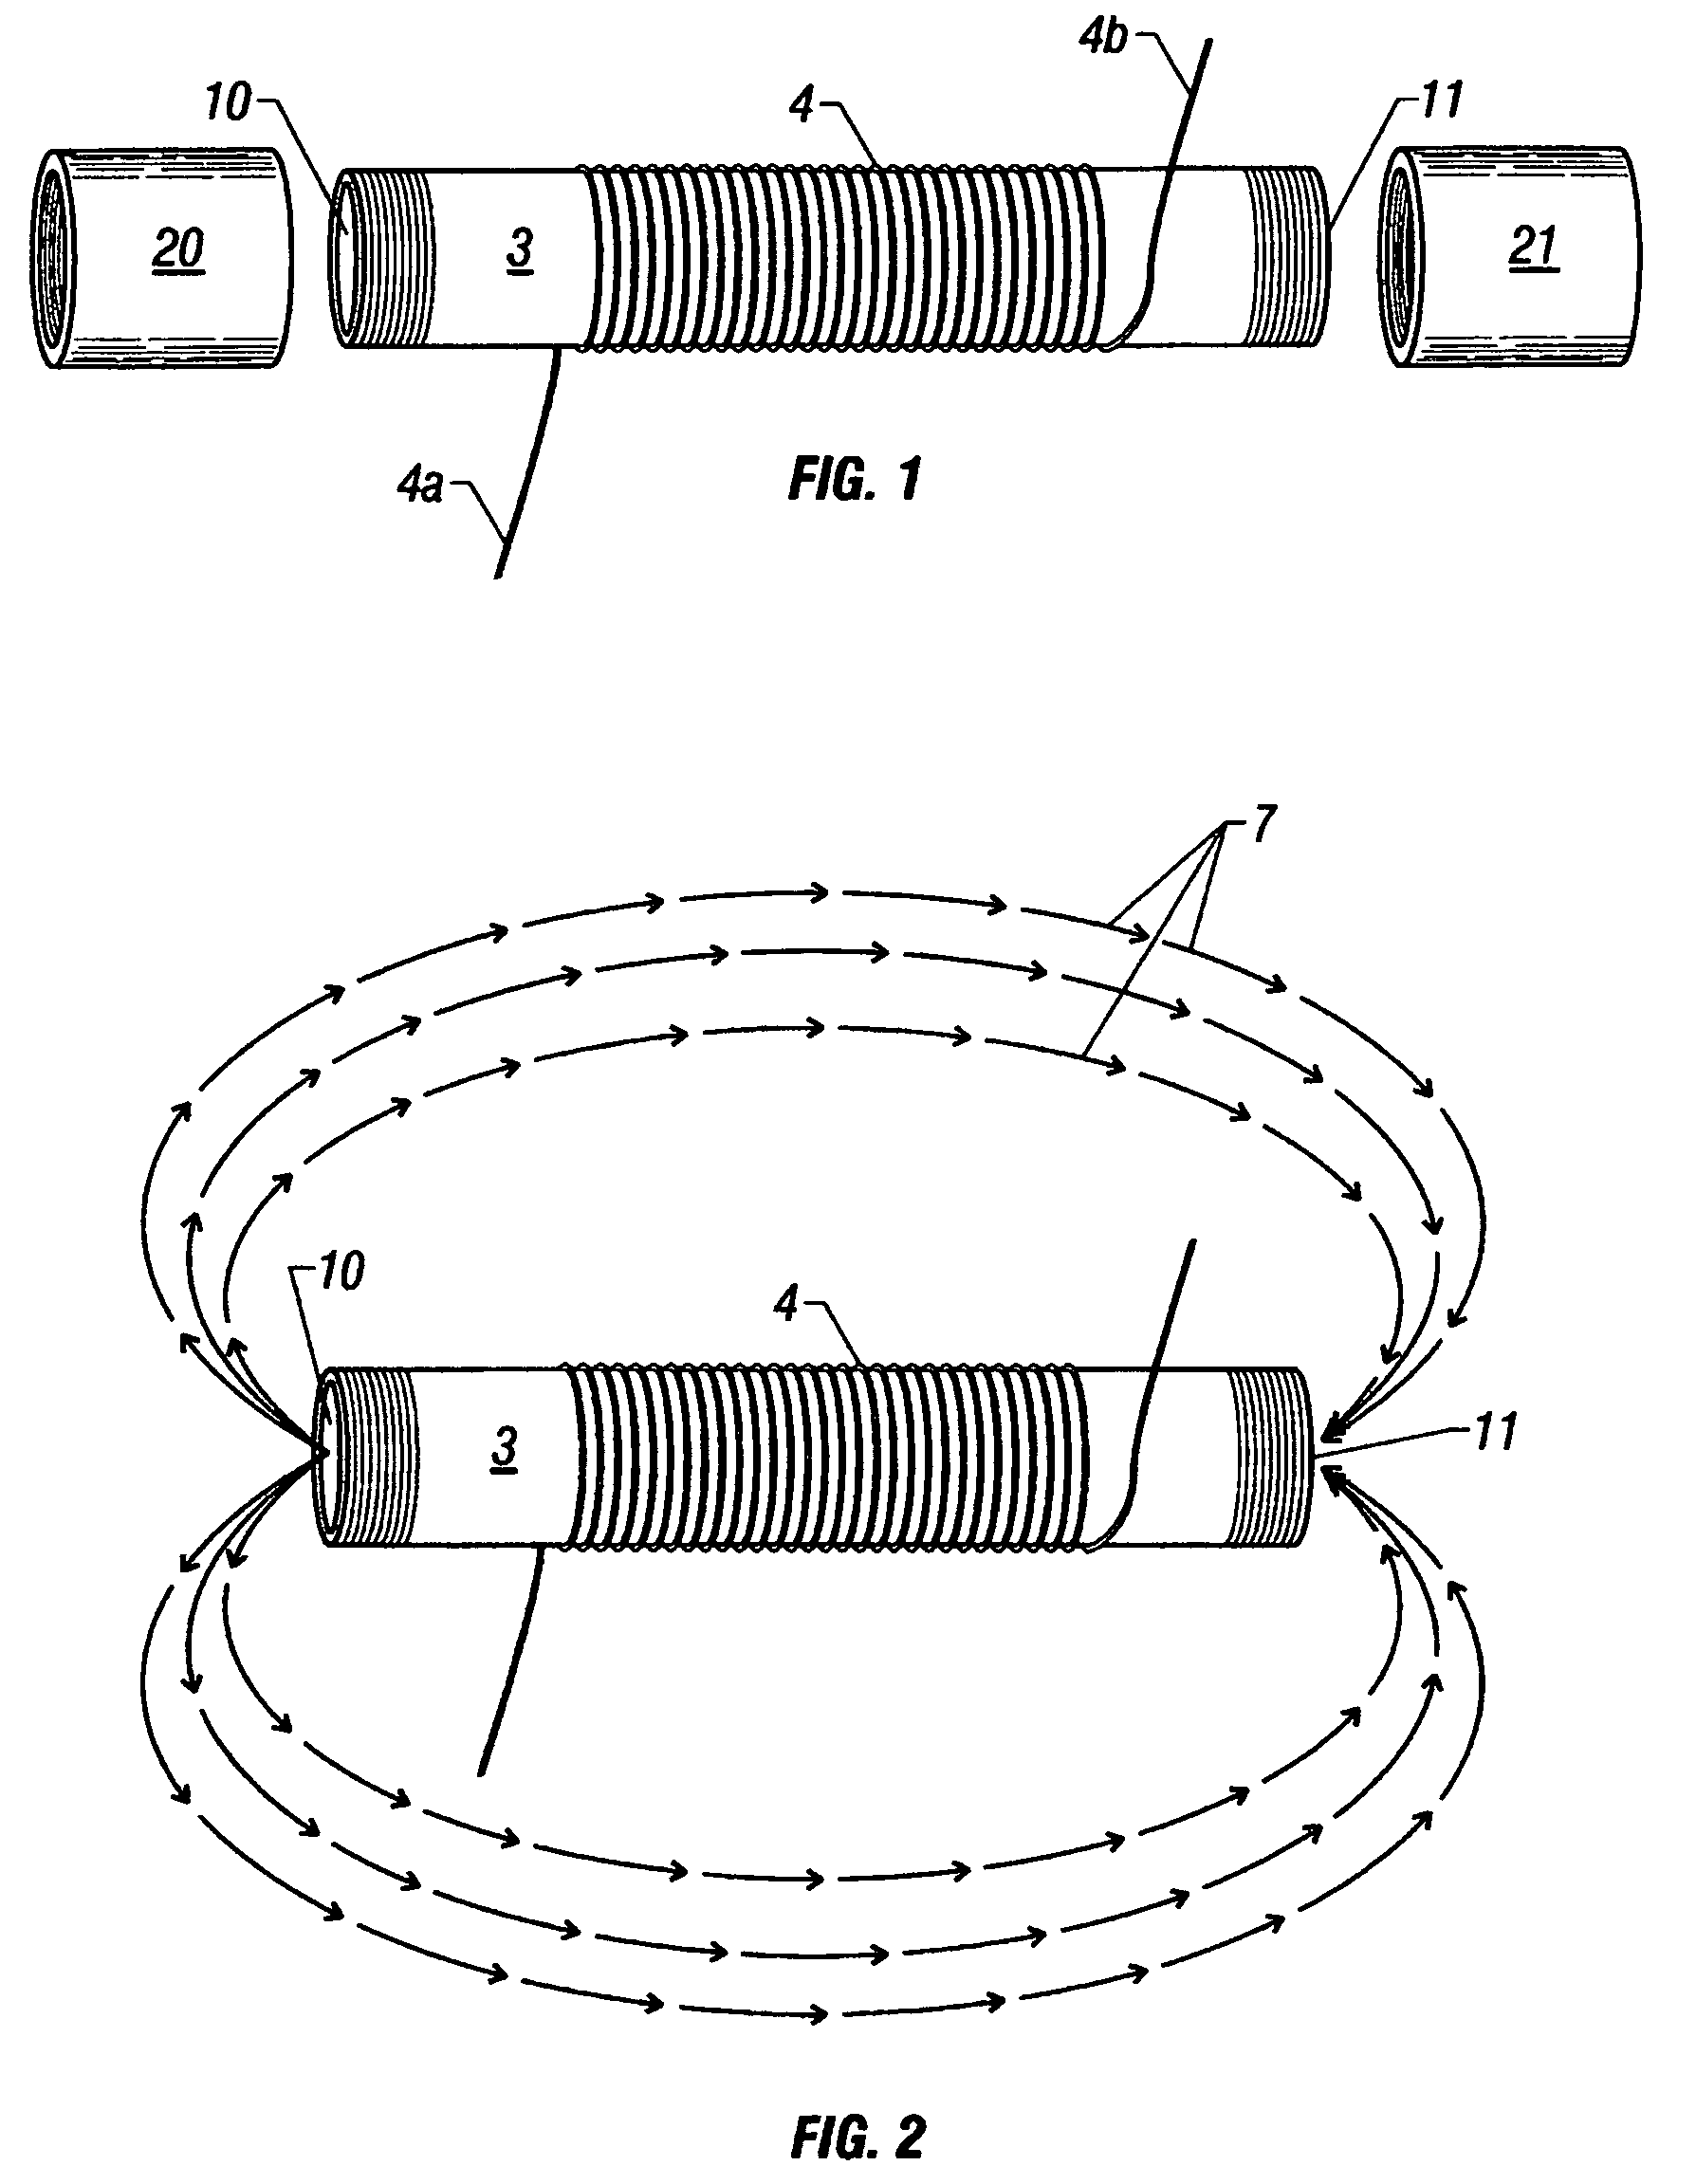 Method and apparatus for preventing scale deposits and removing contaminants from fluid columns